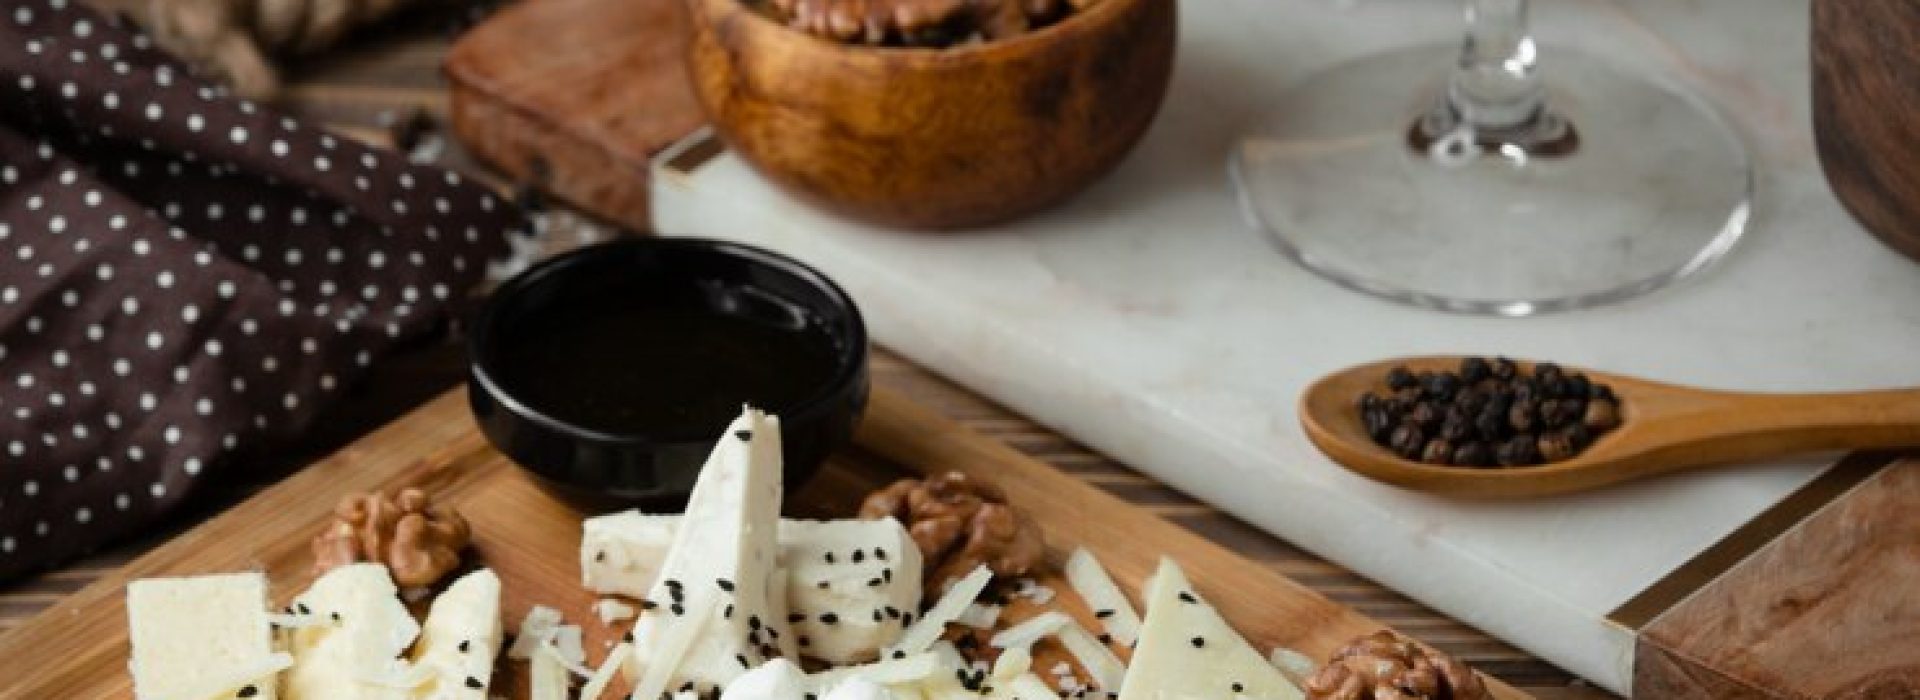 cheese-plate-on-wooden-board-with-white-wine_140725-329